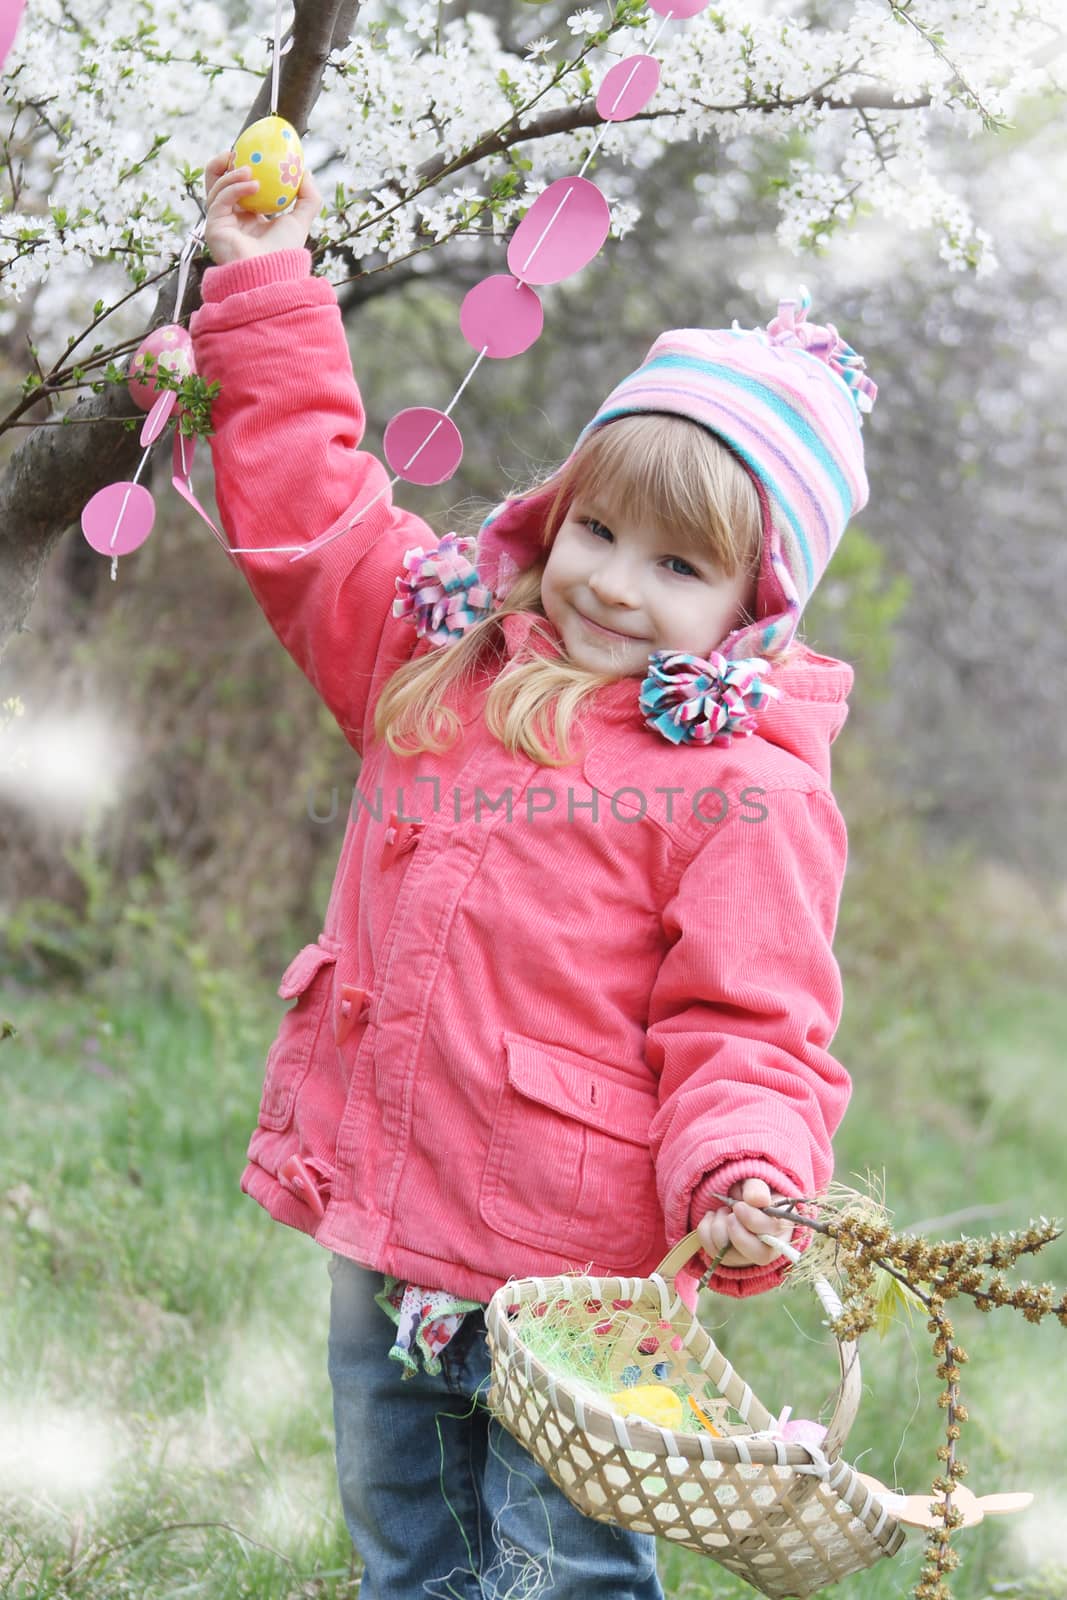 Pretty girl holding painted egg outdoor in spring by Angel_a